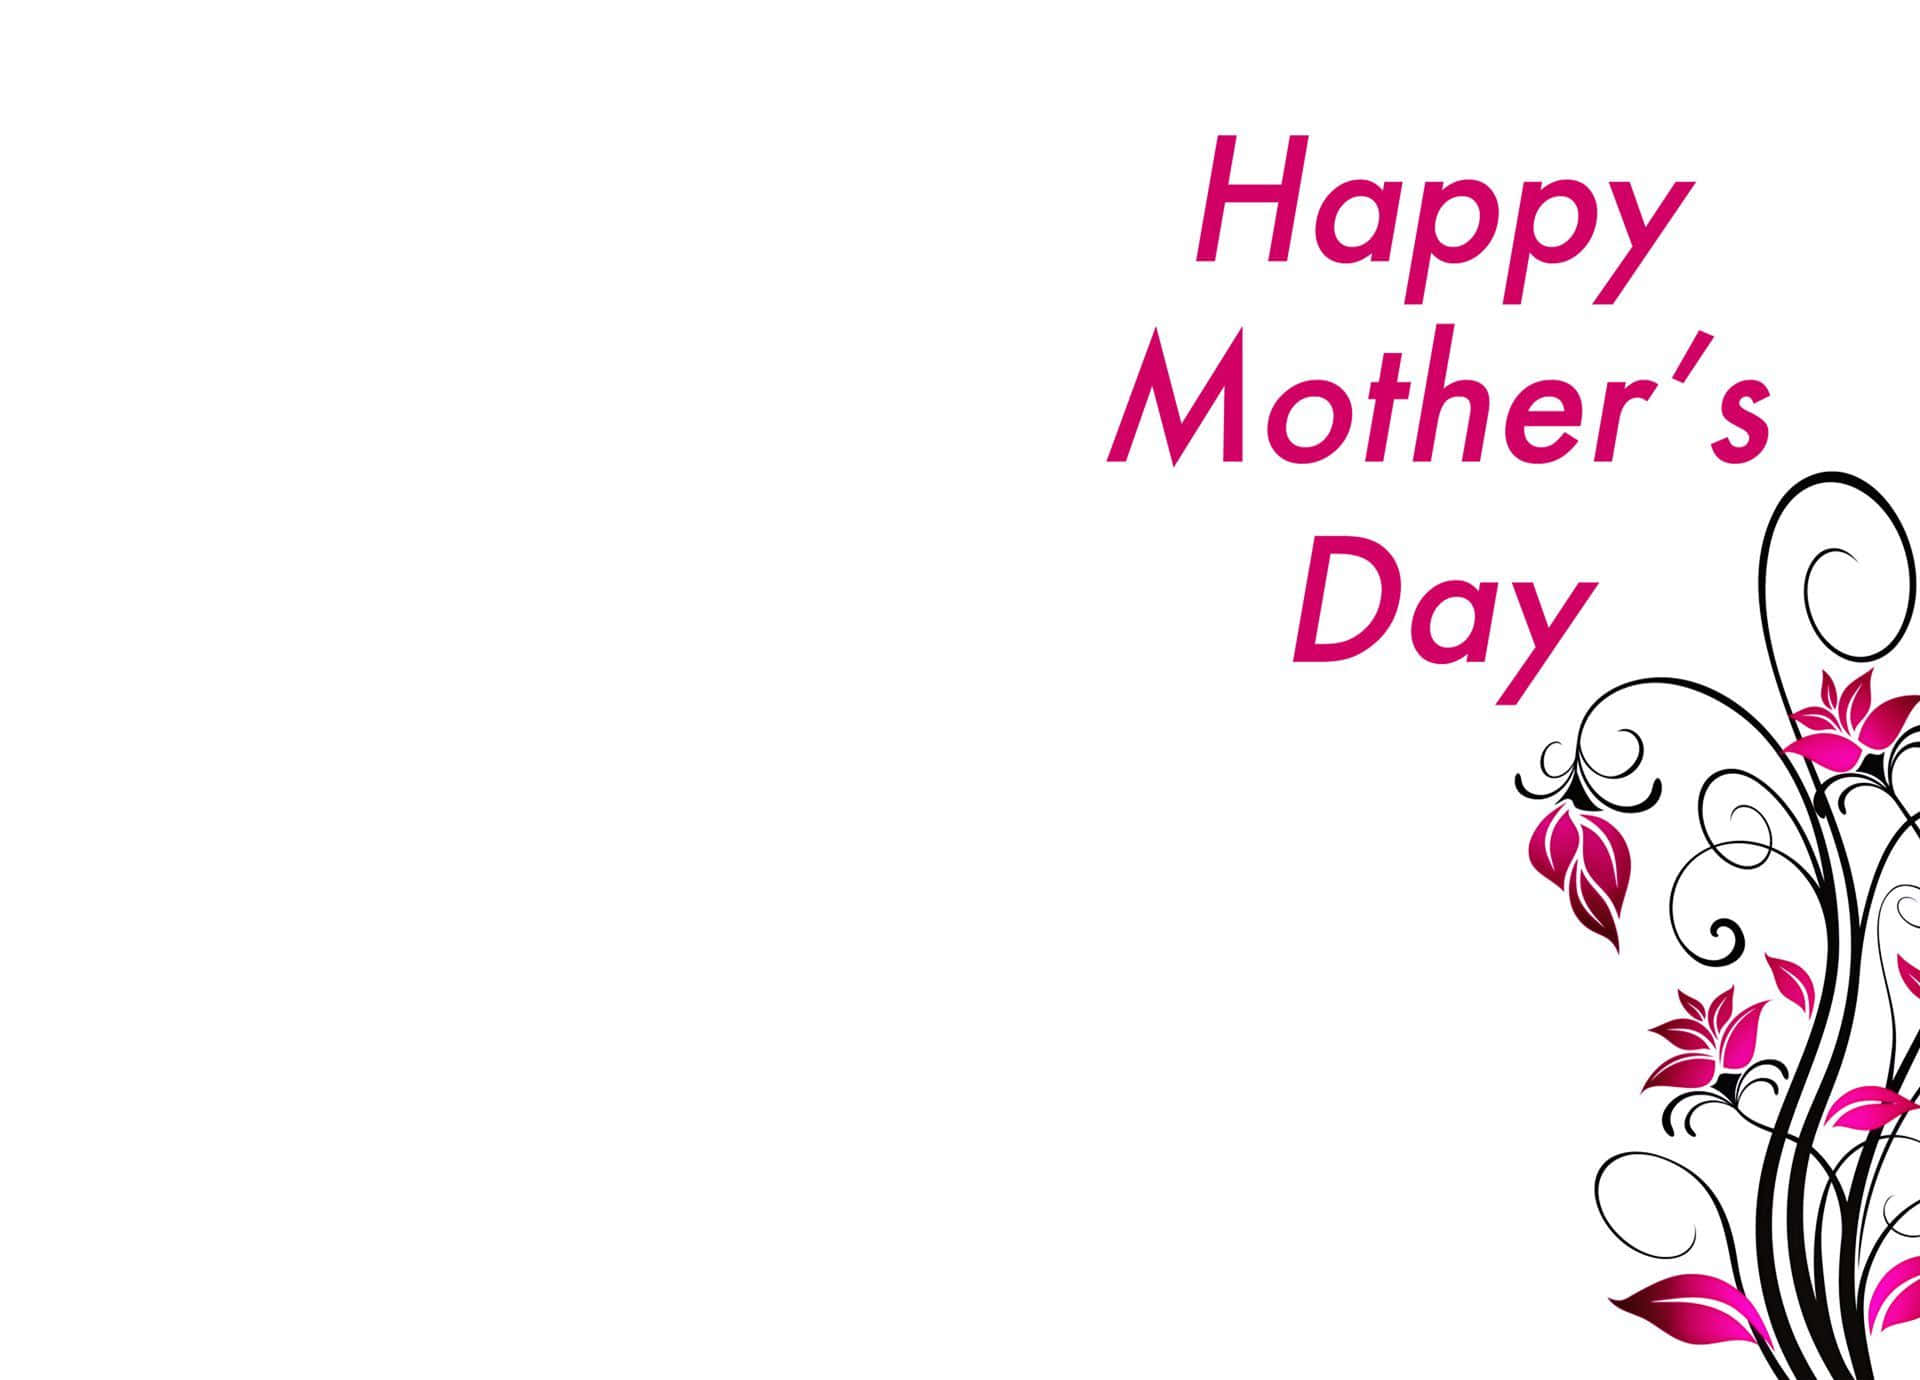 Happy Mother's Day Card With Pink Flowers